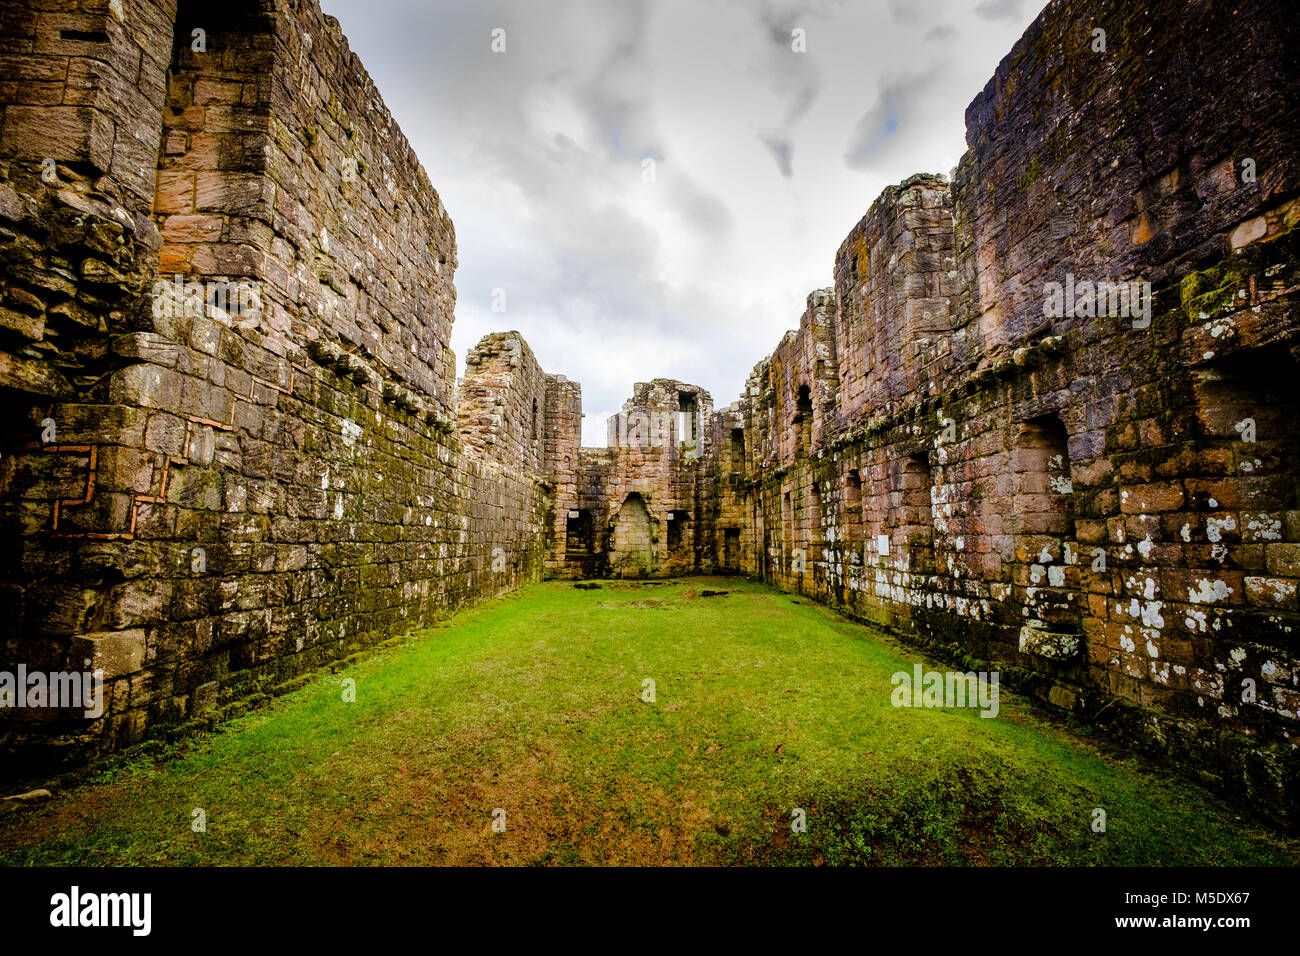 The Great Hall in Morton Castle. Morton Castle is located by an artificial loch in the hills above Nithsdale, in Dumfries and Galloway, south-west Sco Stock Photo